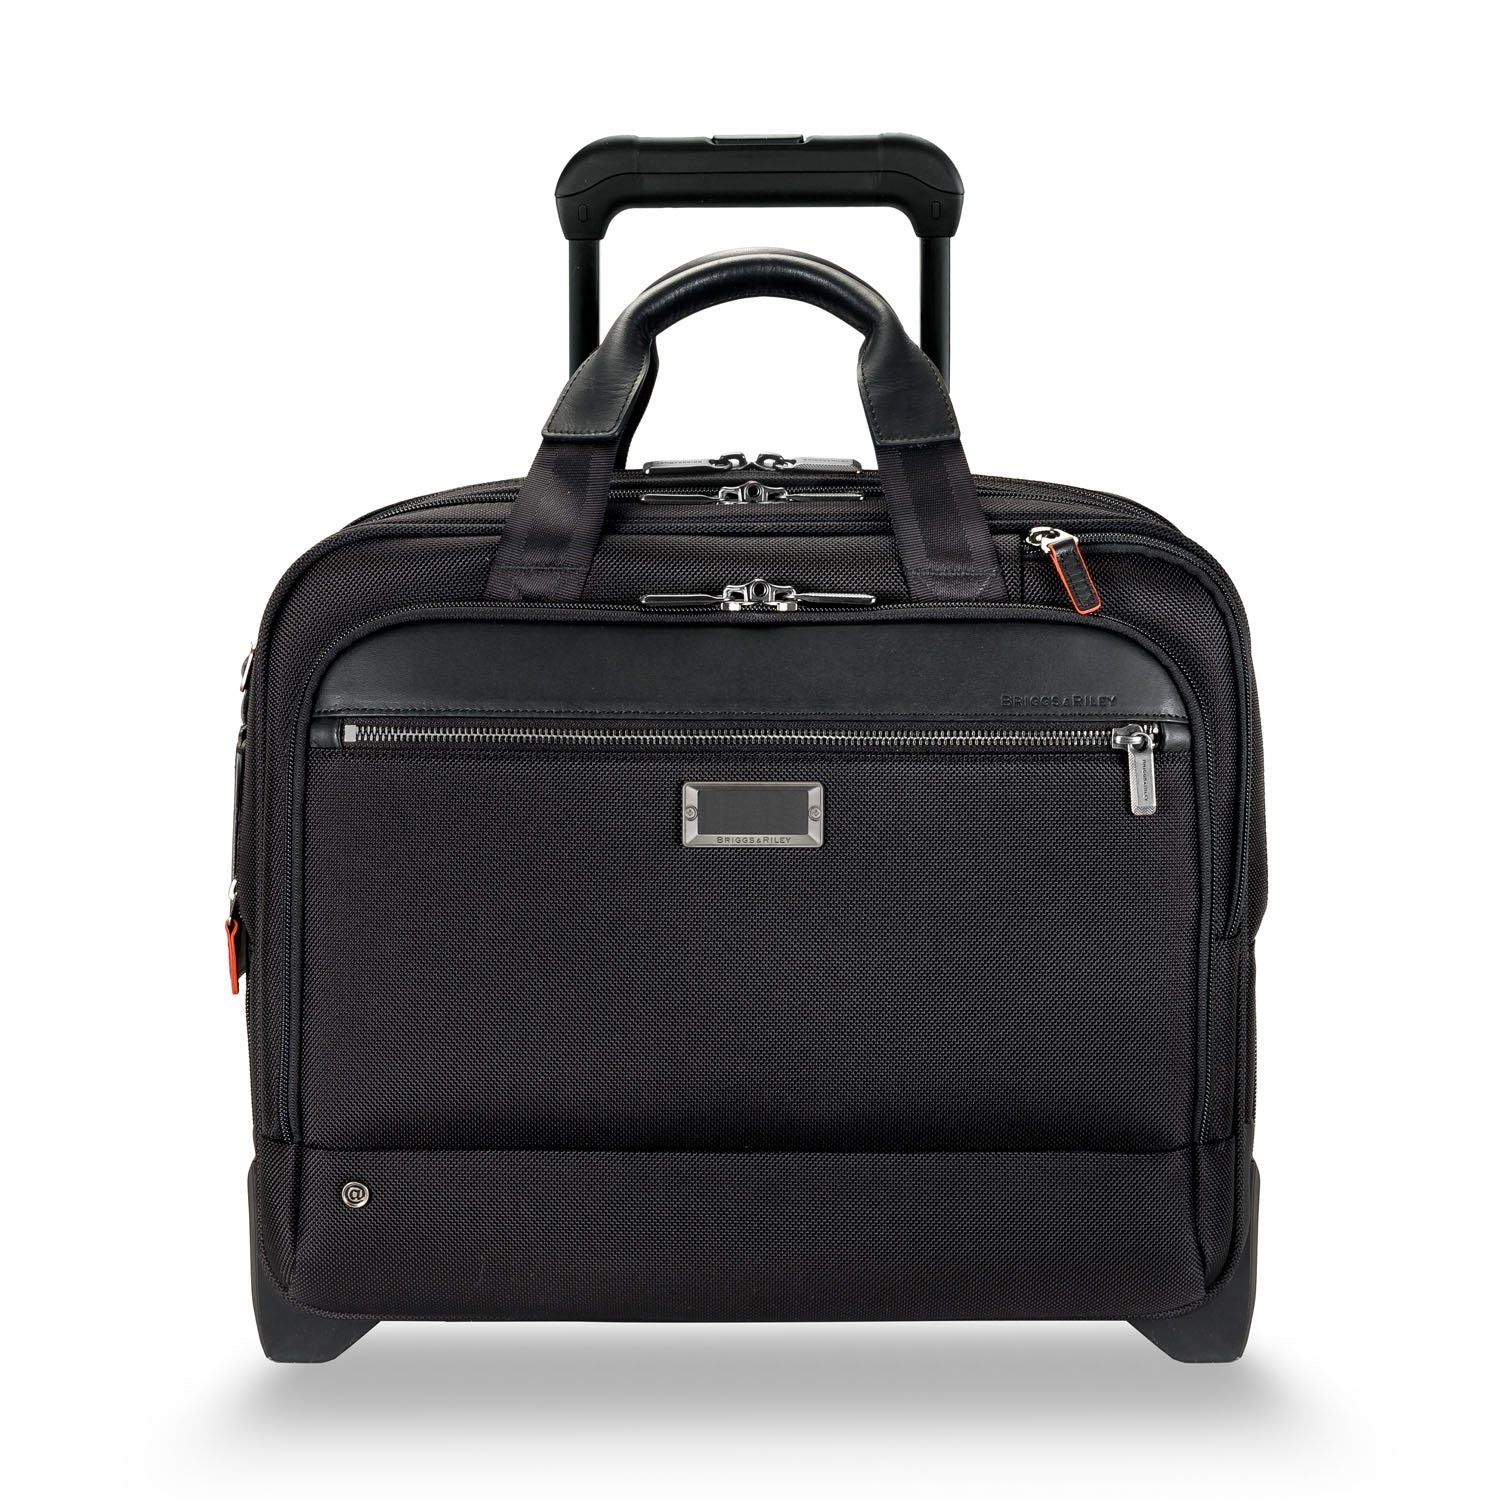 For a really tough day in the office: Bulletproof briefcase turns